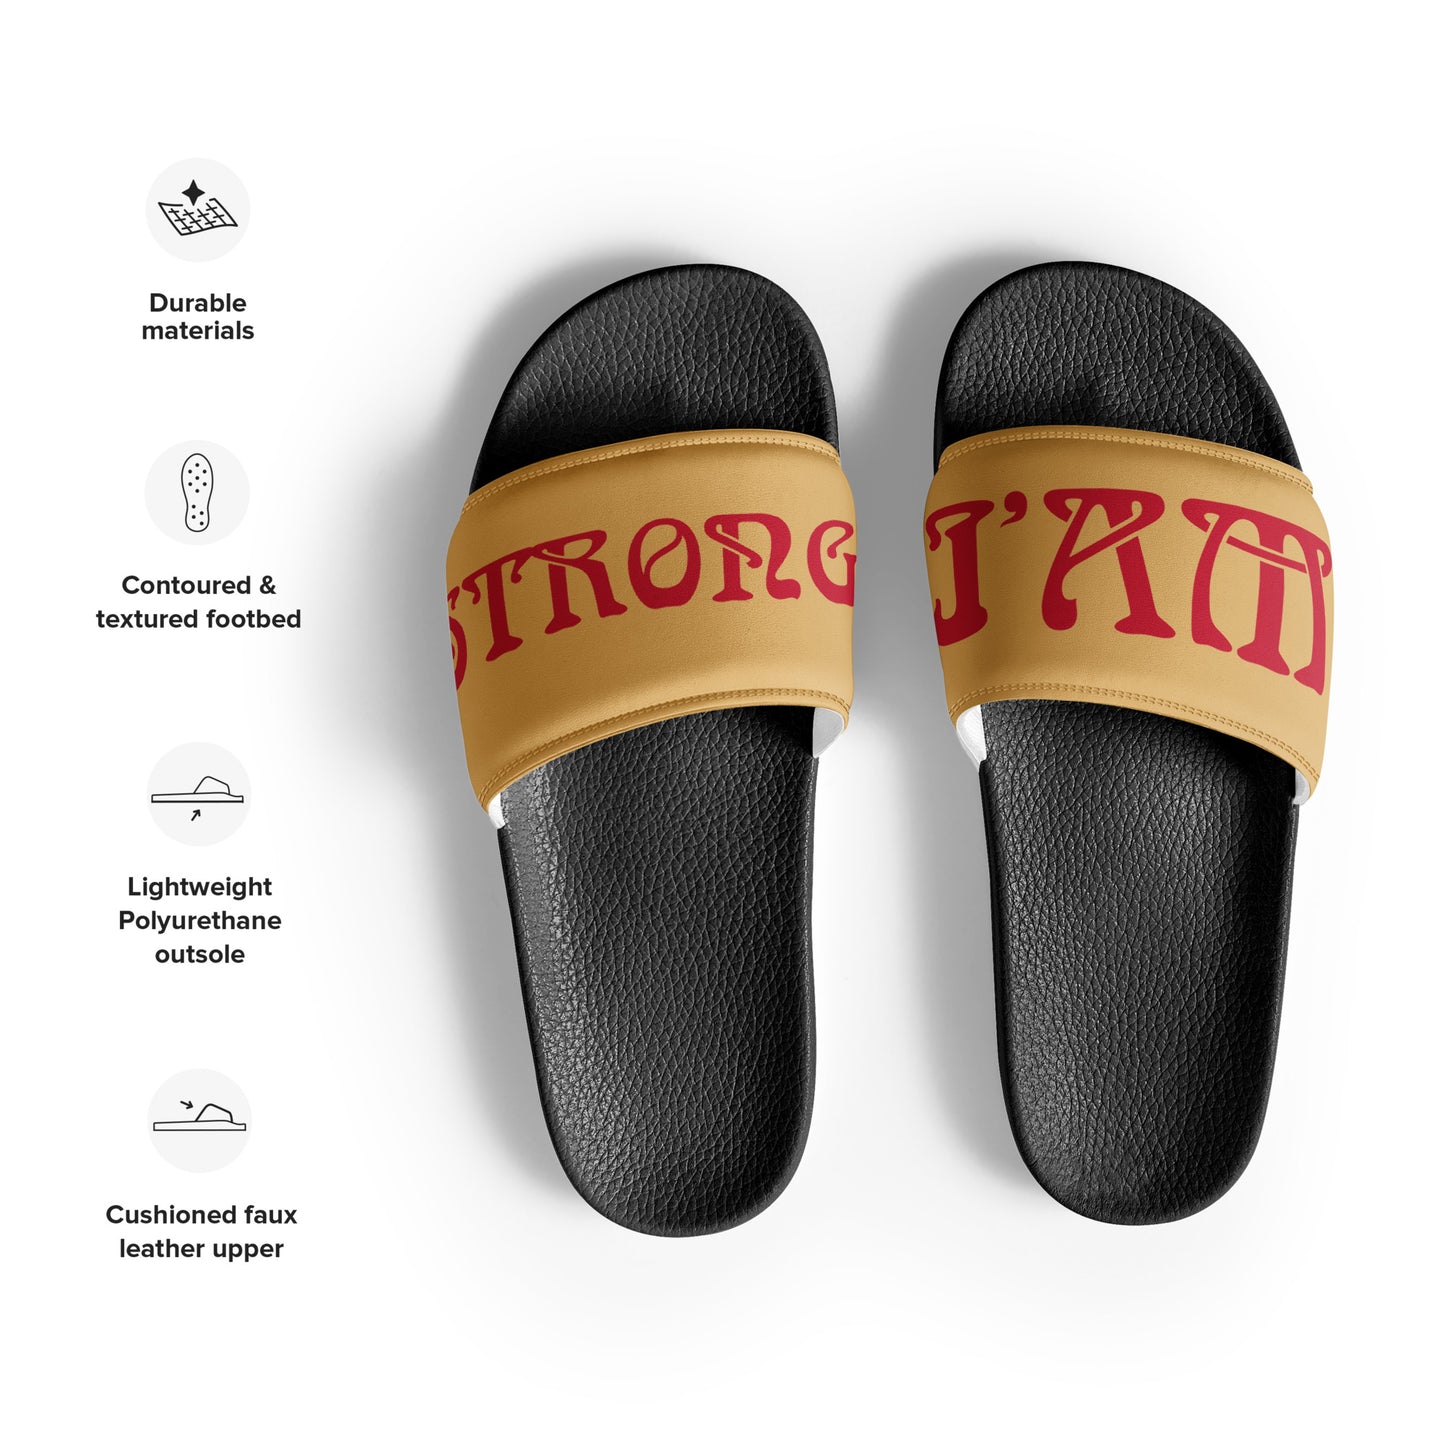 “I’AM STRONG” Fawn Women's Slides W/Red Font